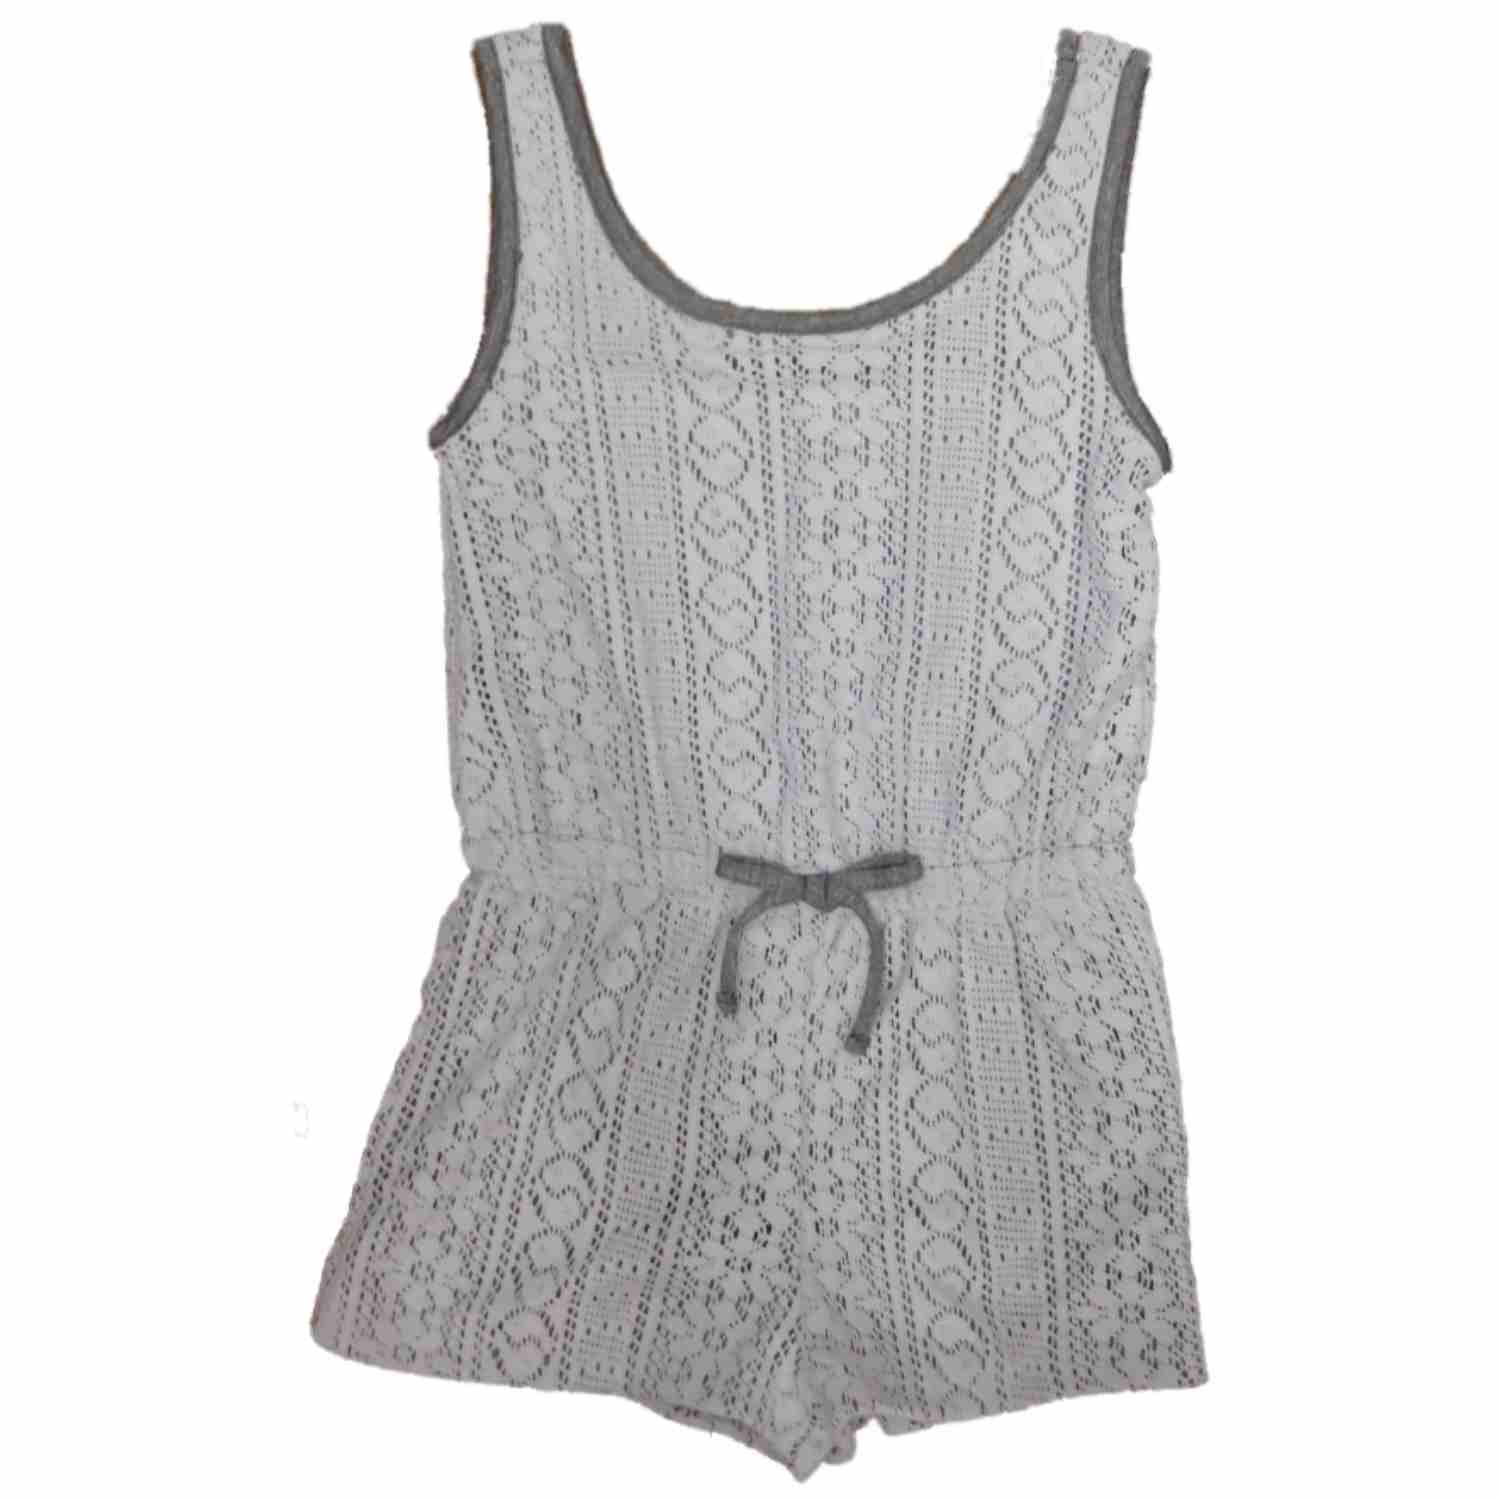 Canyon River Blues Girls White Gray Sleeveless Lace Overlay Romper Large (14)